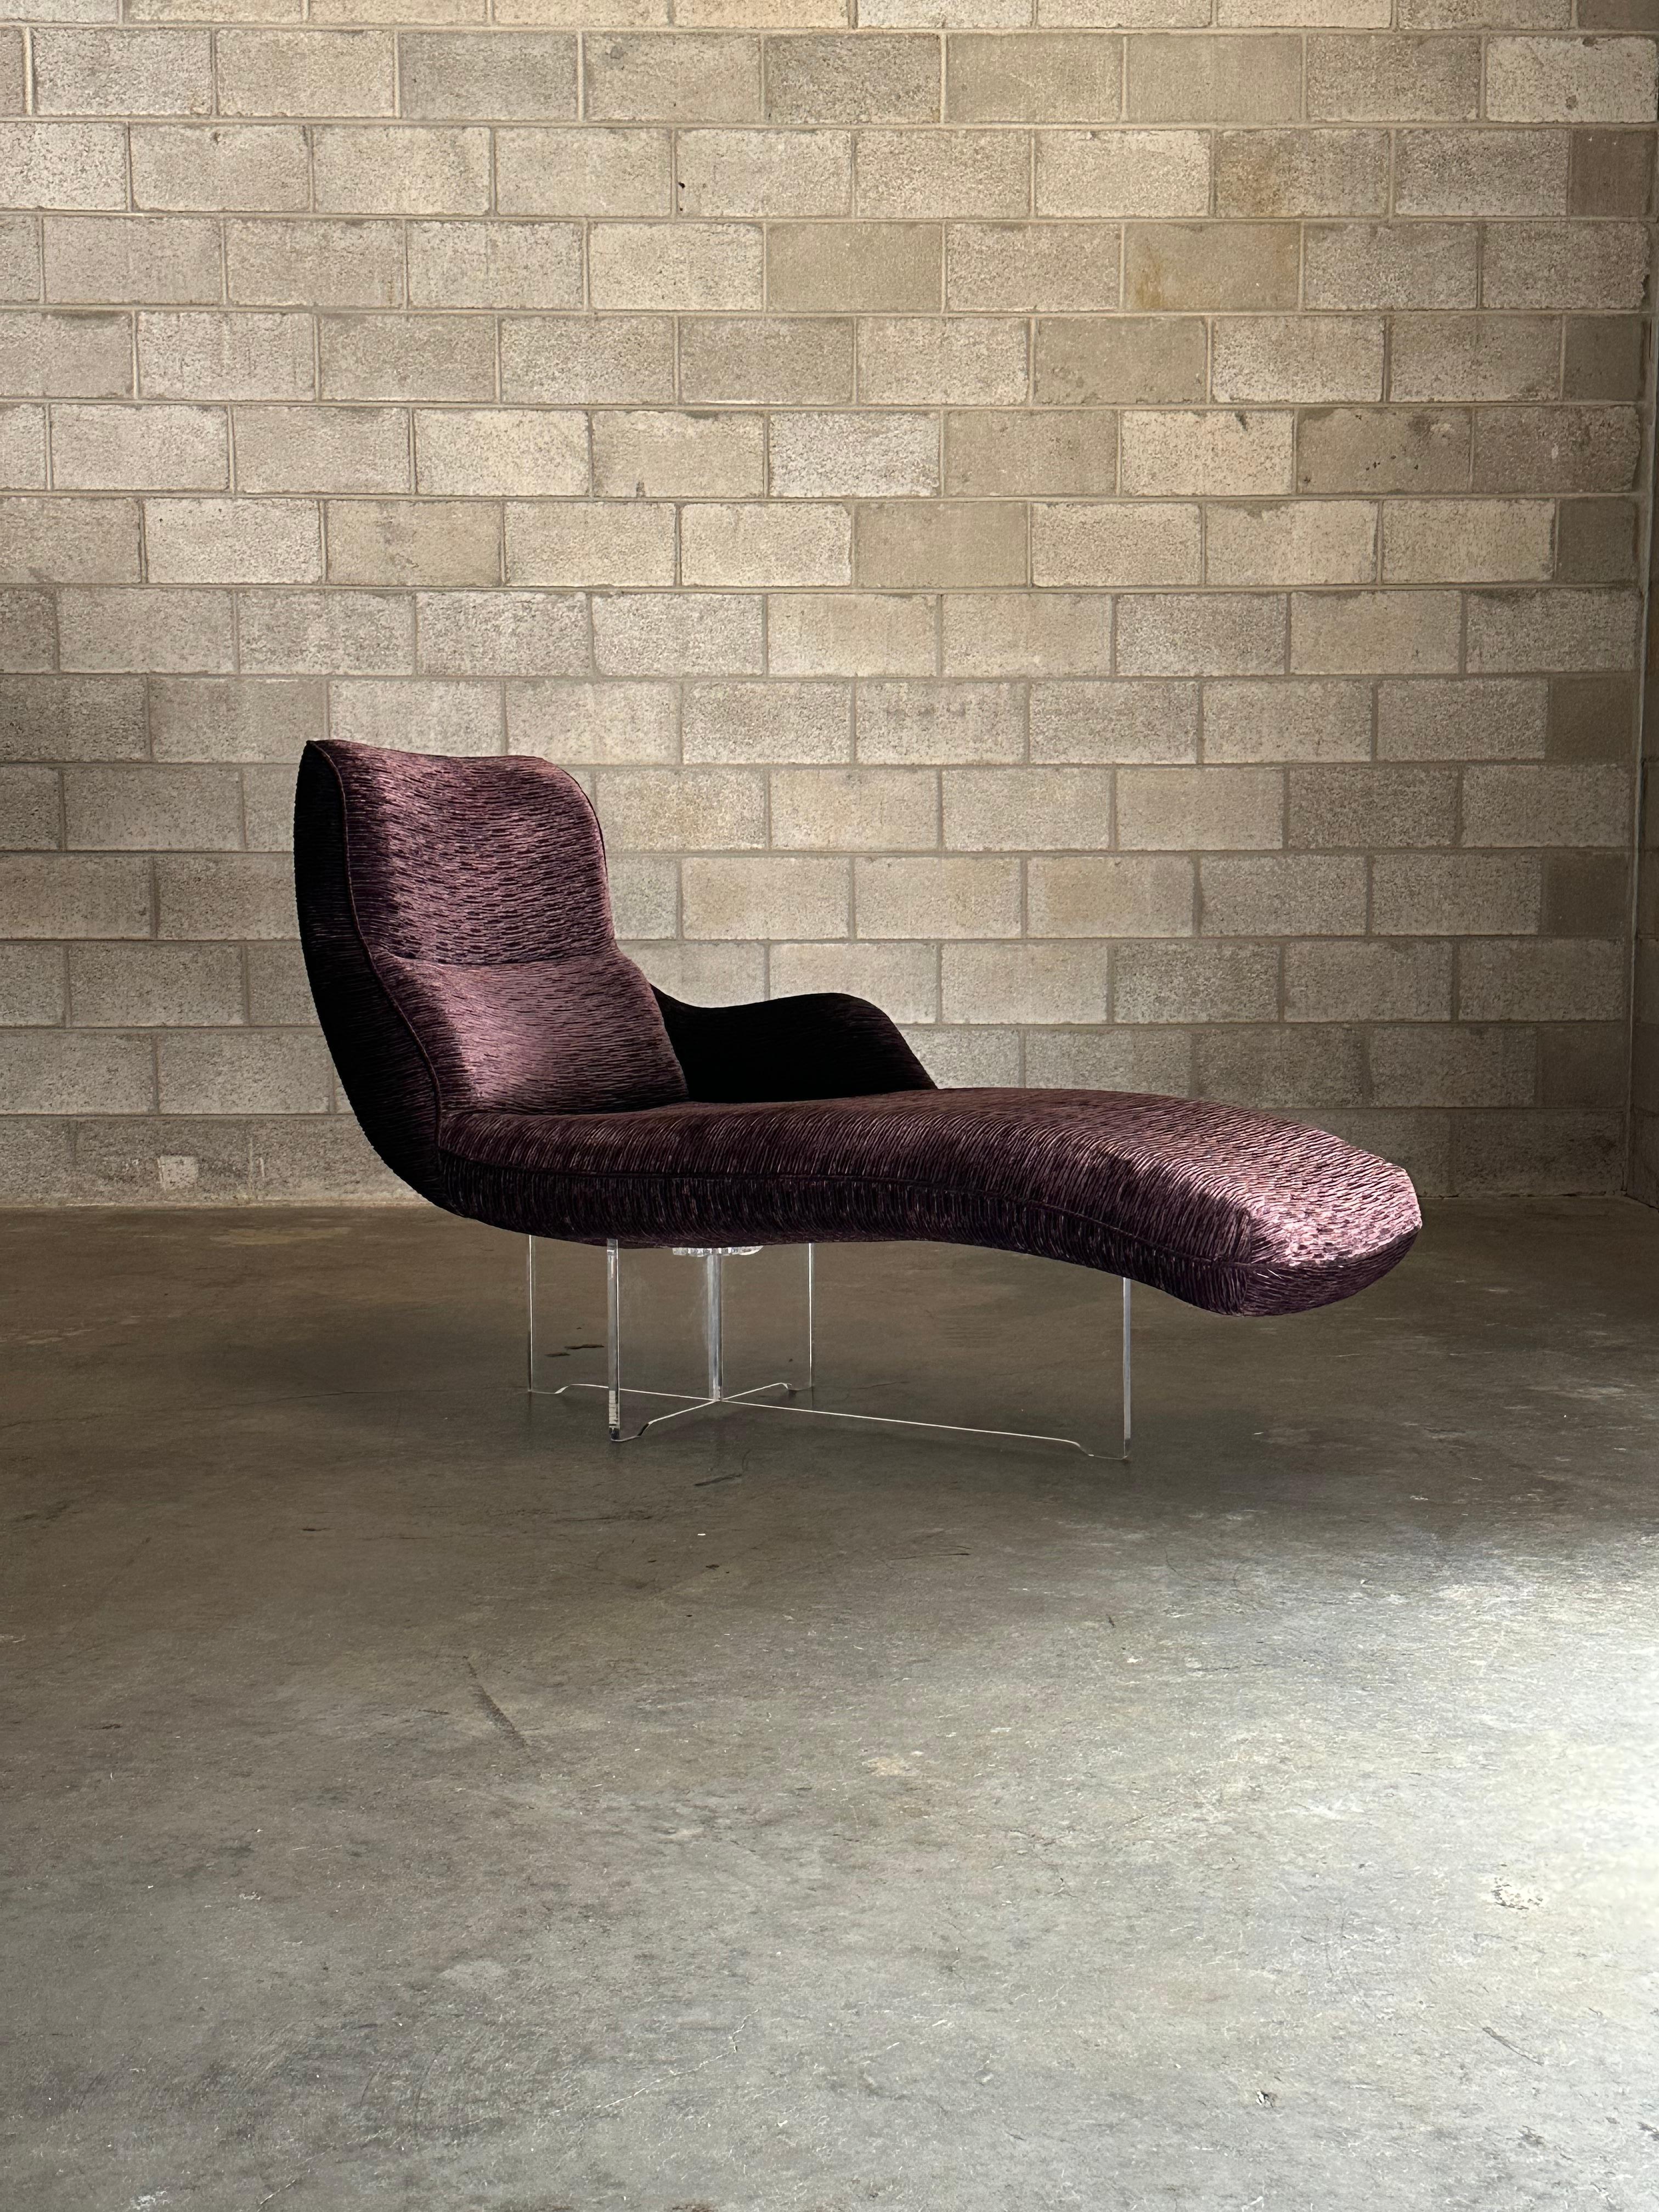 An iconic chaise lounge designed by Vladimir Kagan, model 6910, commonly known as the 